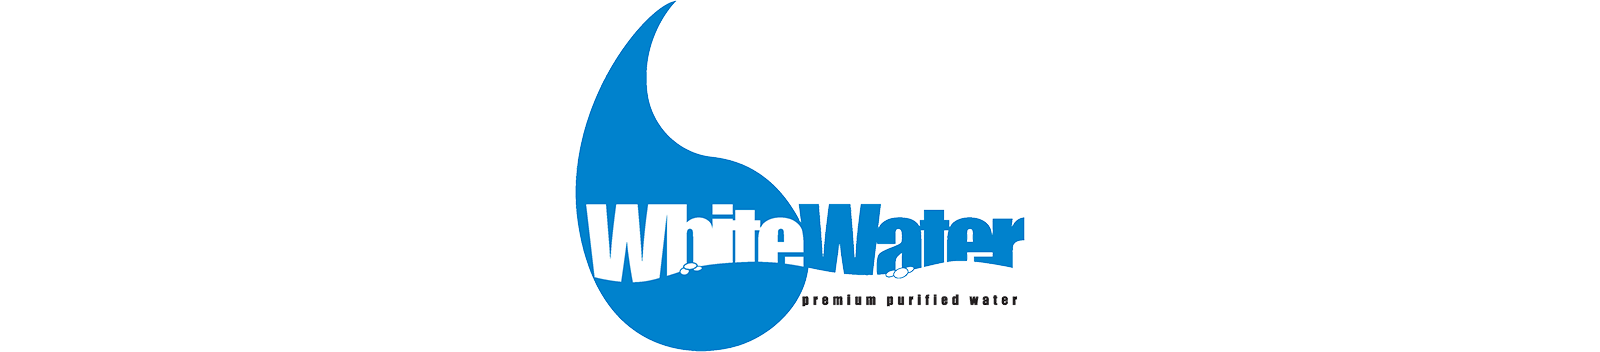 Water Brand Logo - White Water. Custom Water Bottle Labels & Water Delivery